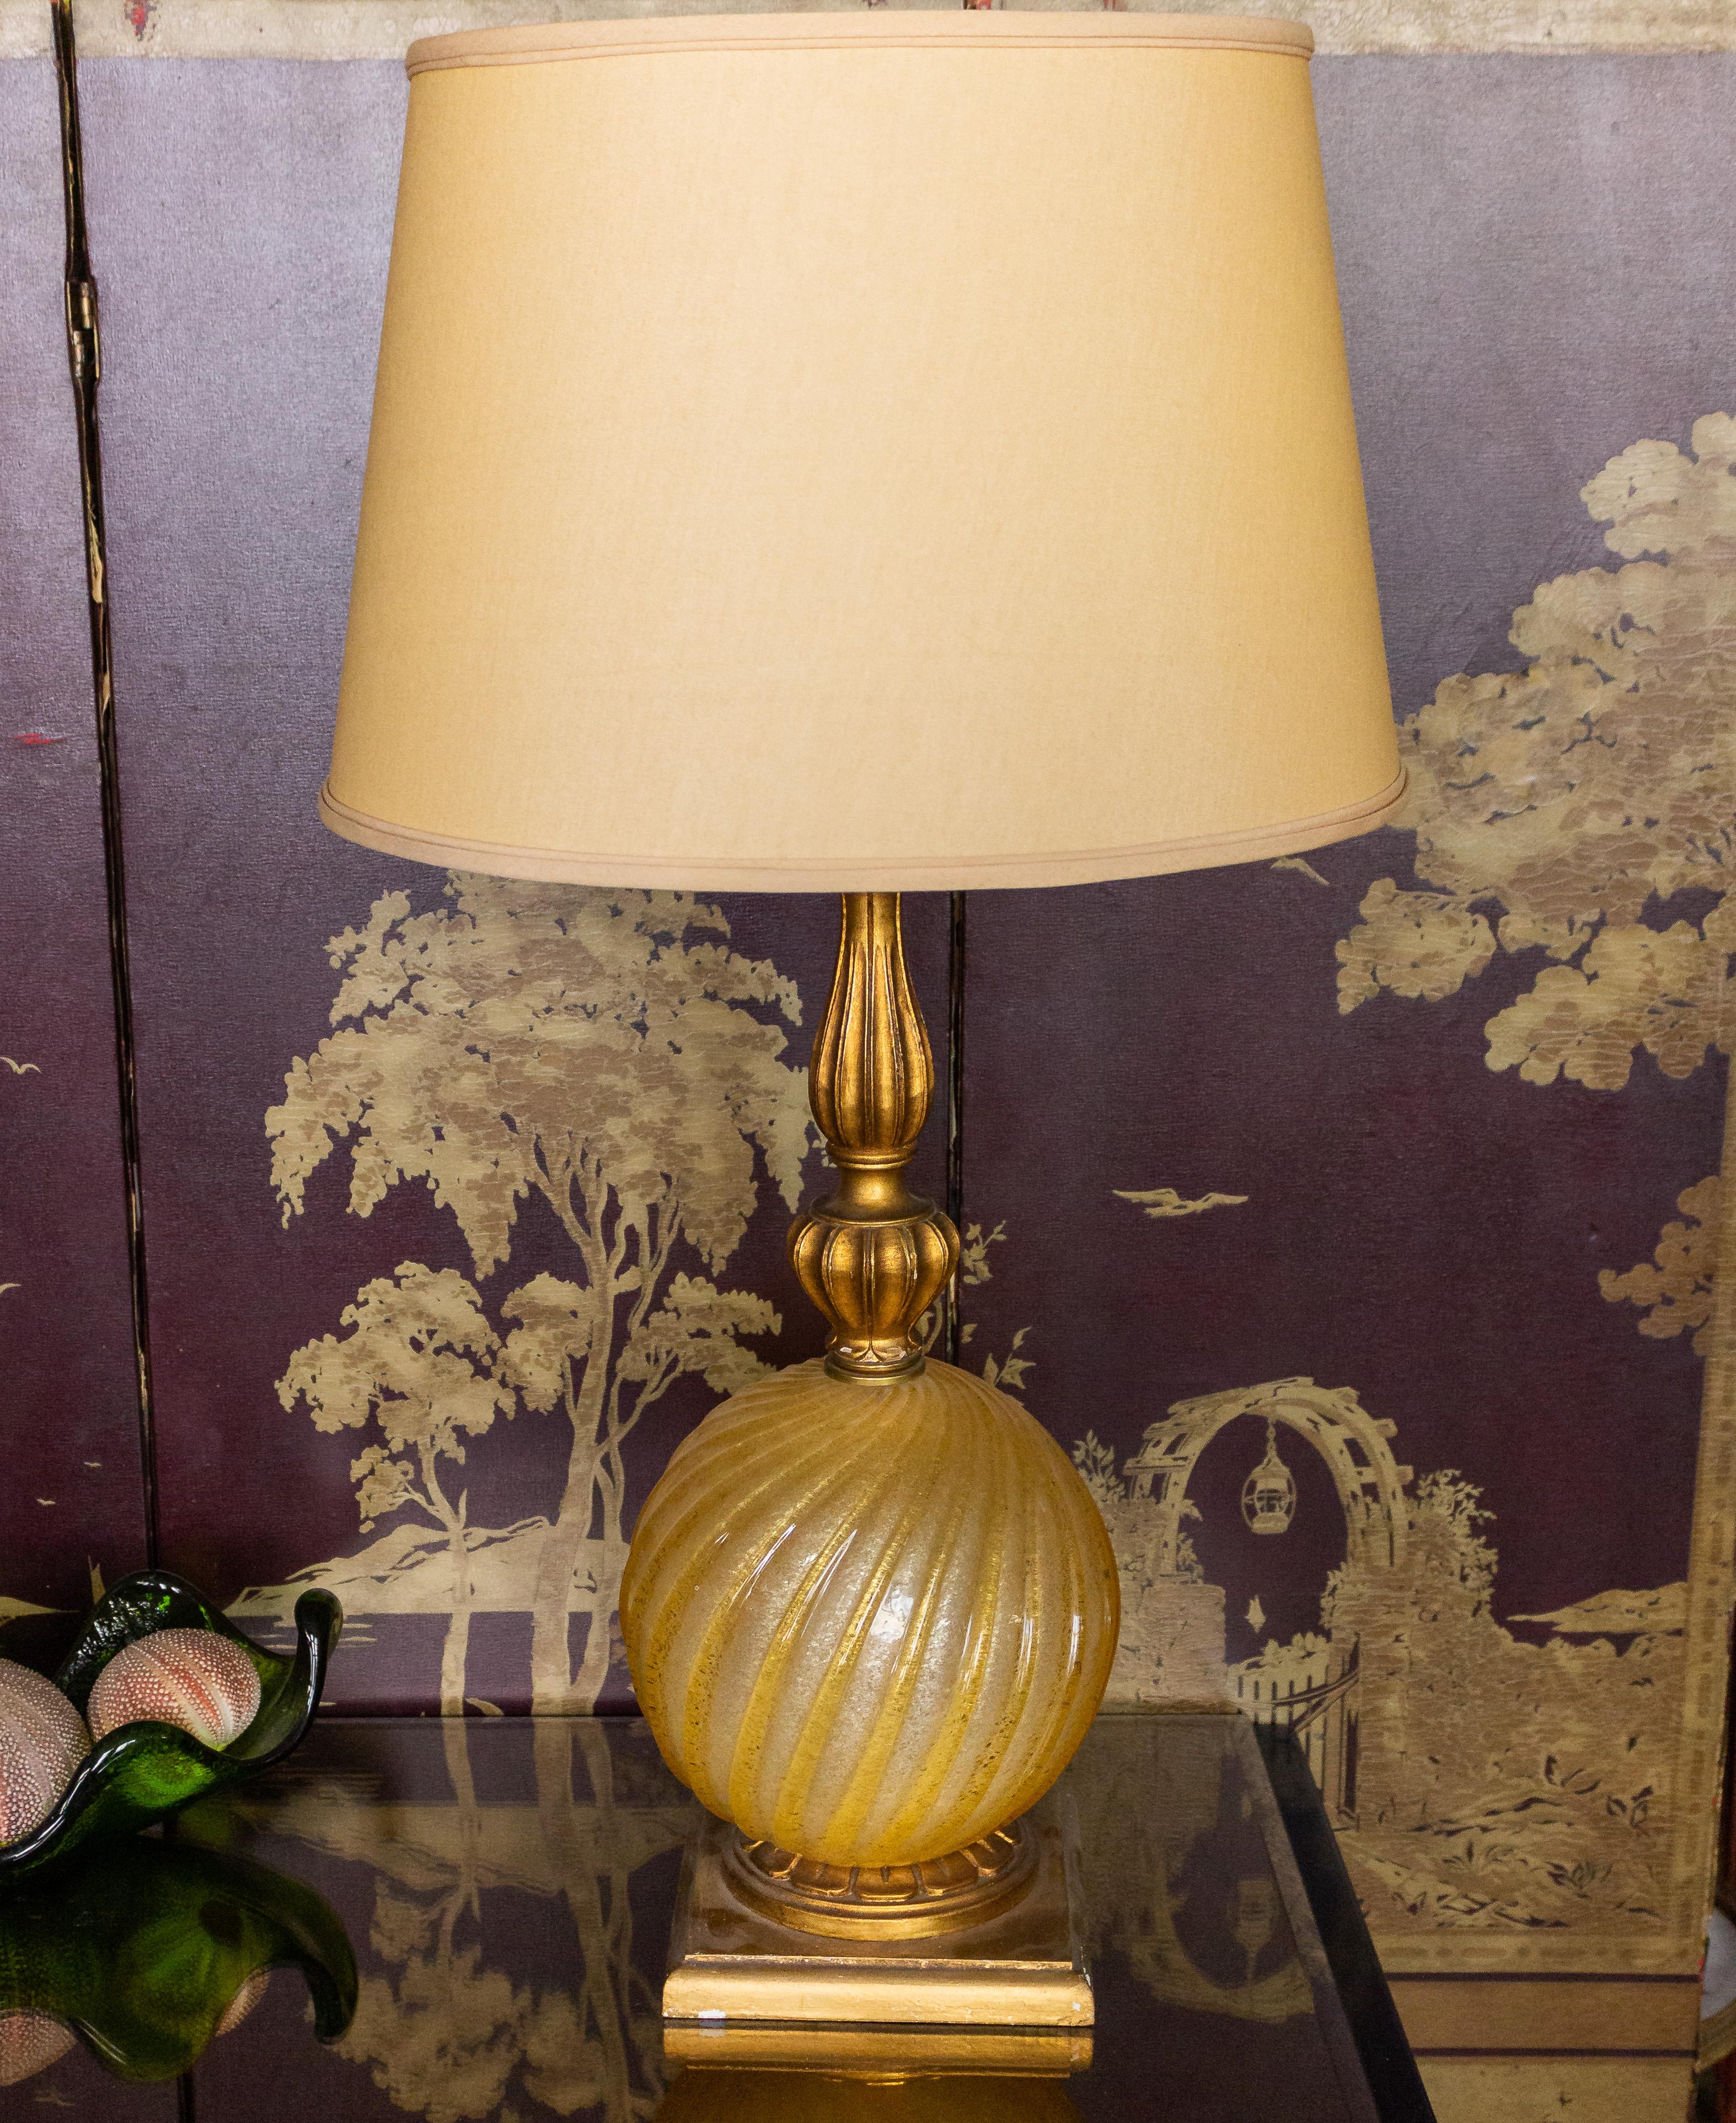 A stunning Gold Murano glass globe table lamp with a meticulously detailed giltwood stem and base. This elegant lamp has been recently rewired, ensuring its functionality for years to come. While it is in good condition overall, there are some areas